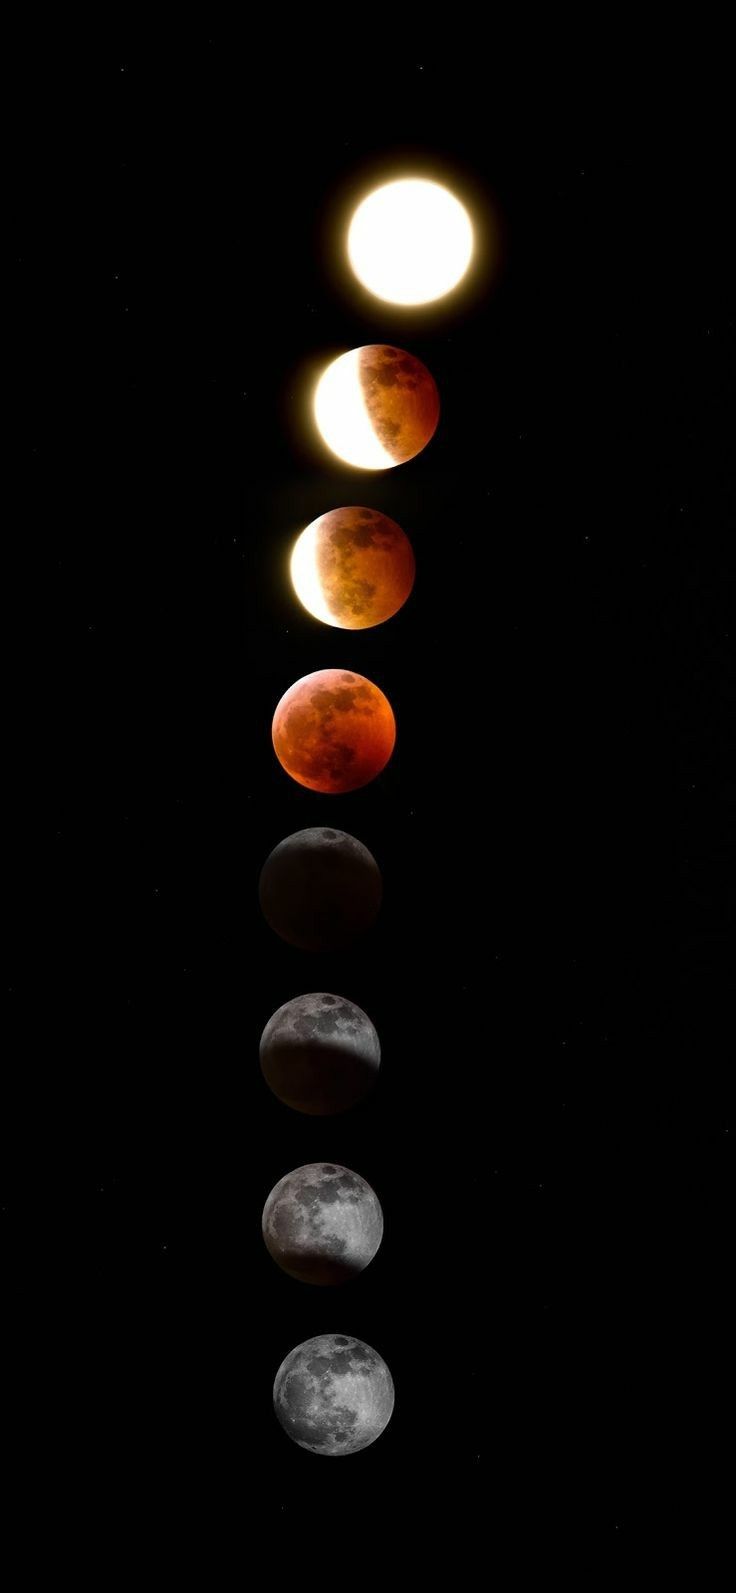 A vertical image of the moon going through different phases during a lunar eclipse. - Eclipse